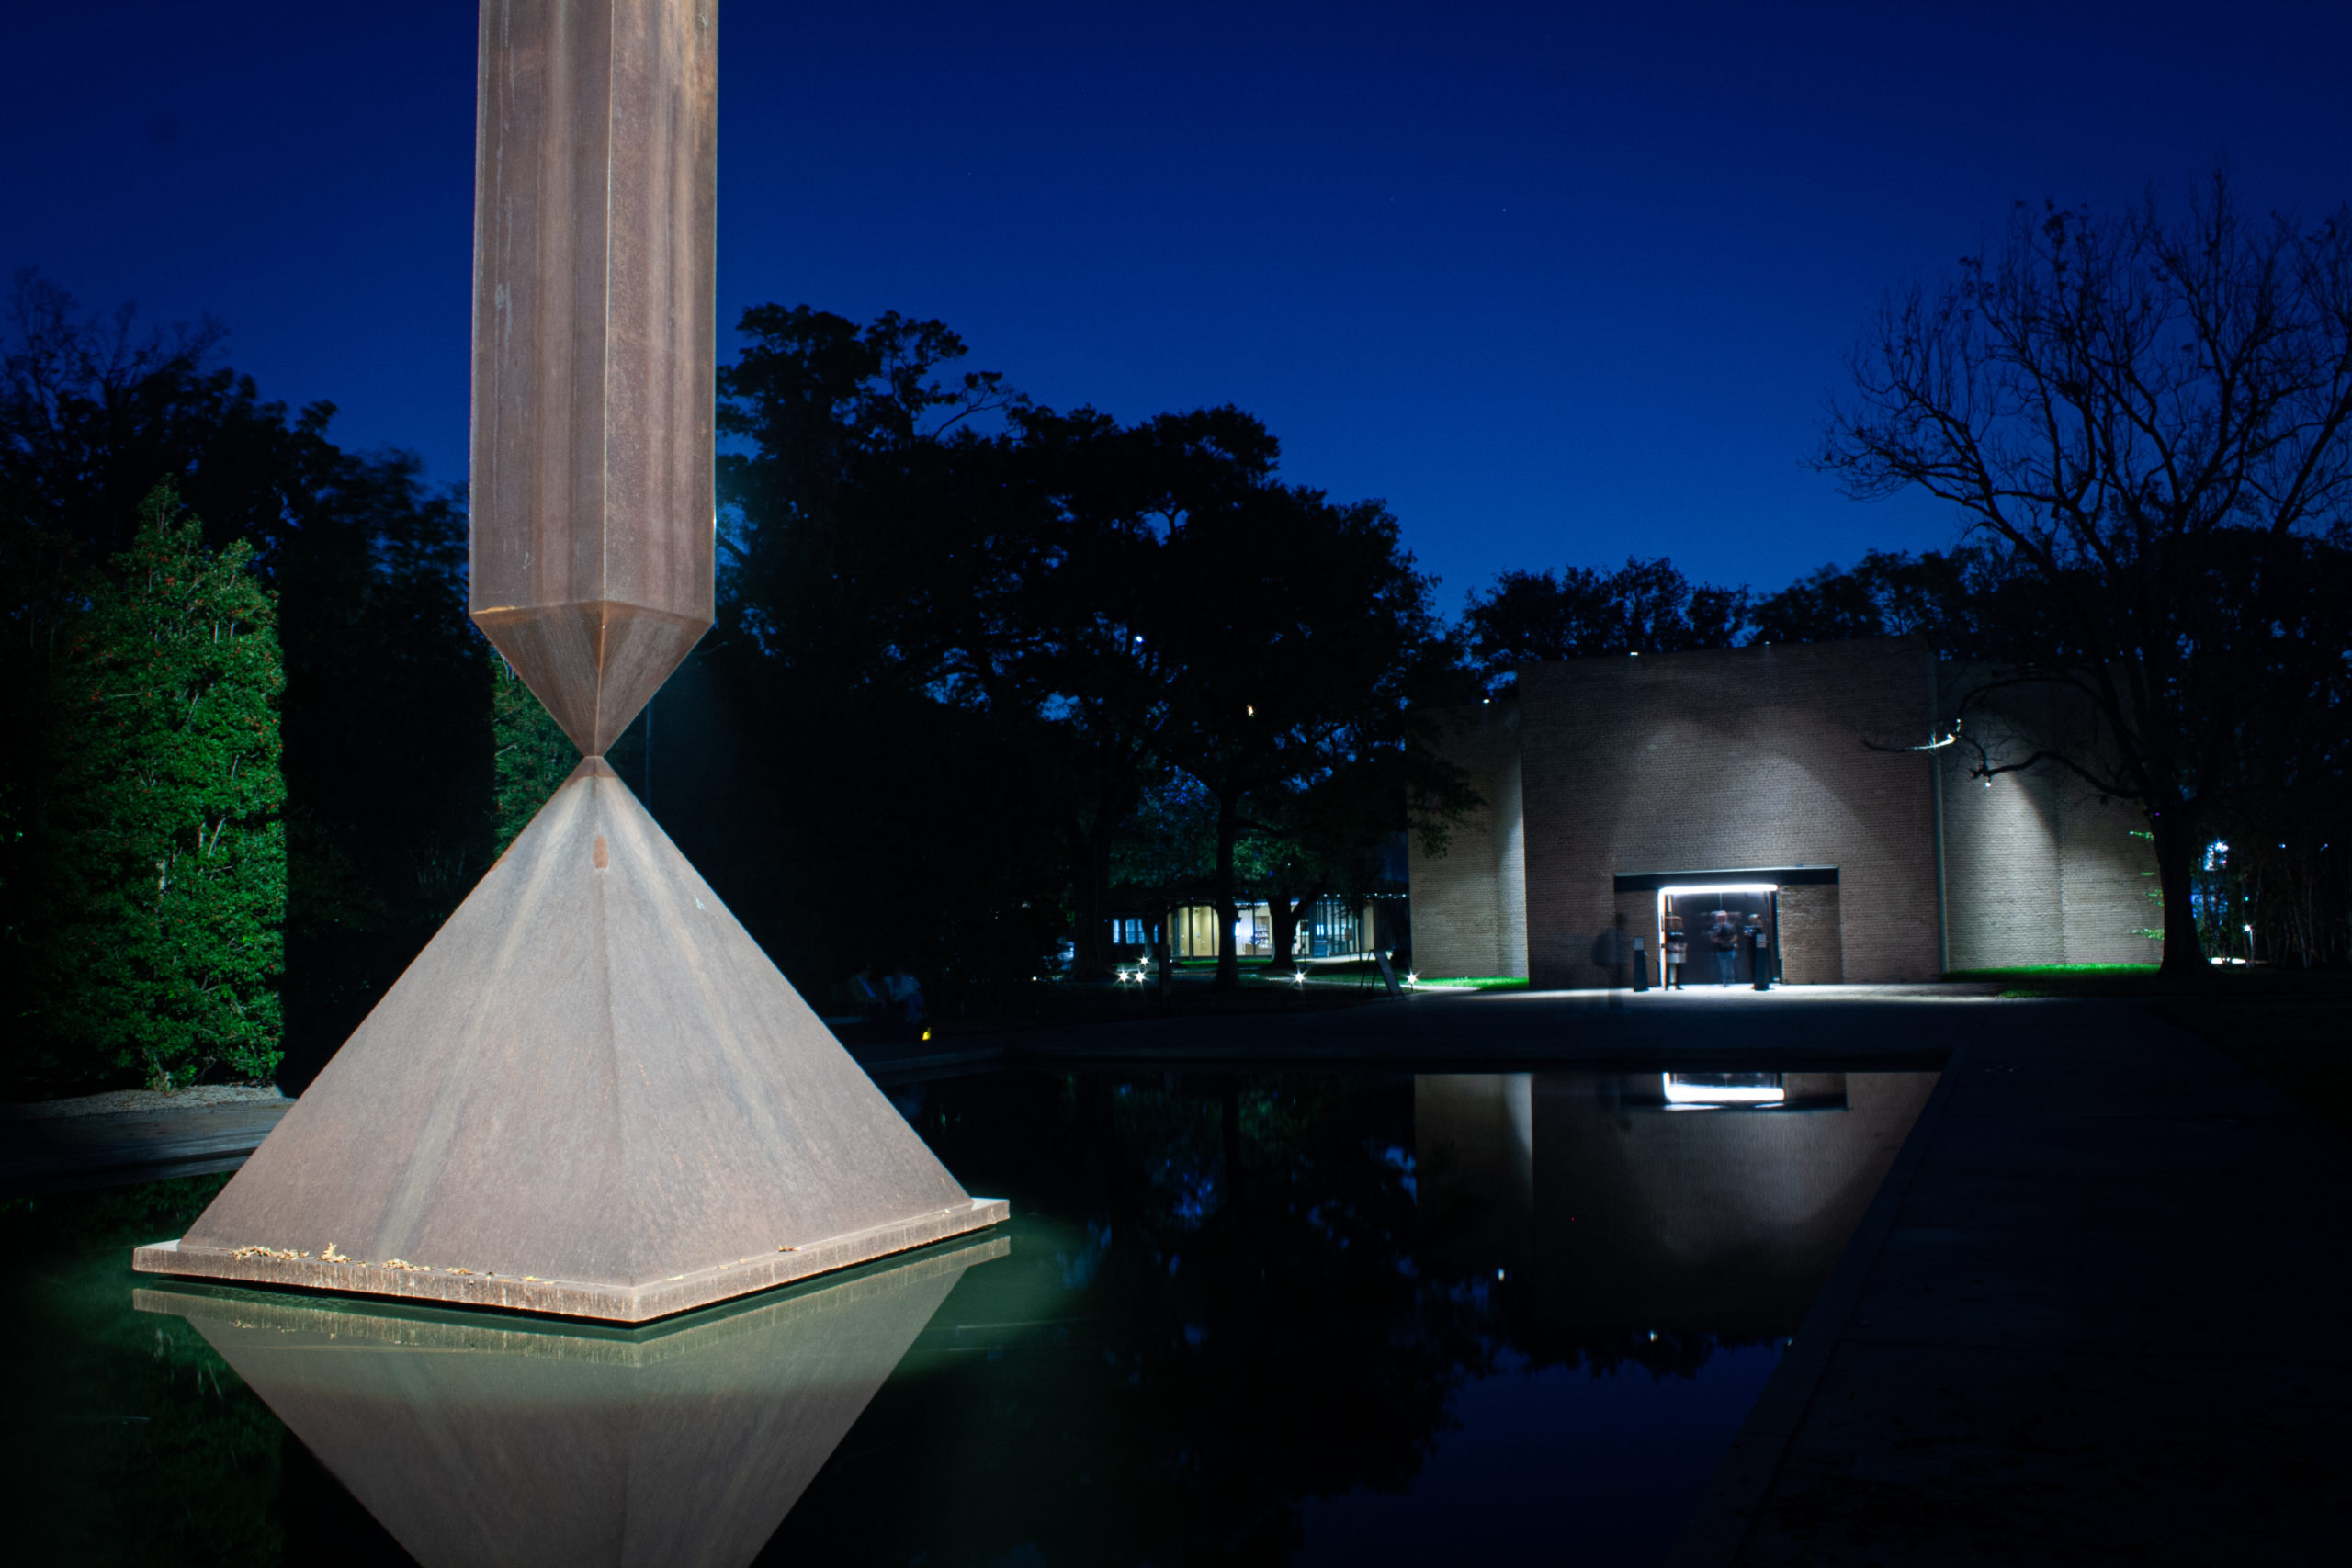 The "Broken Obelisk" sculpture and its reflecting pool stand in front of the Rothko Chapel, where a few blurry figures can be seen at the entrance. It's night time in Houston.